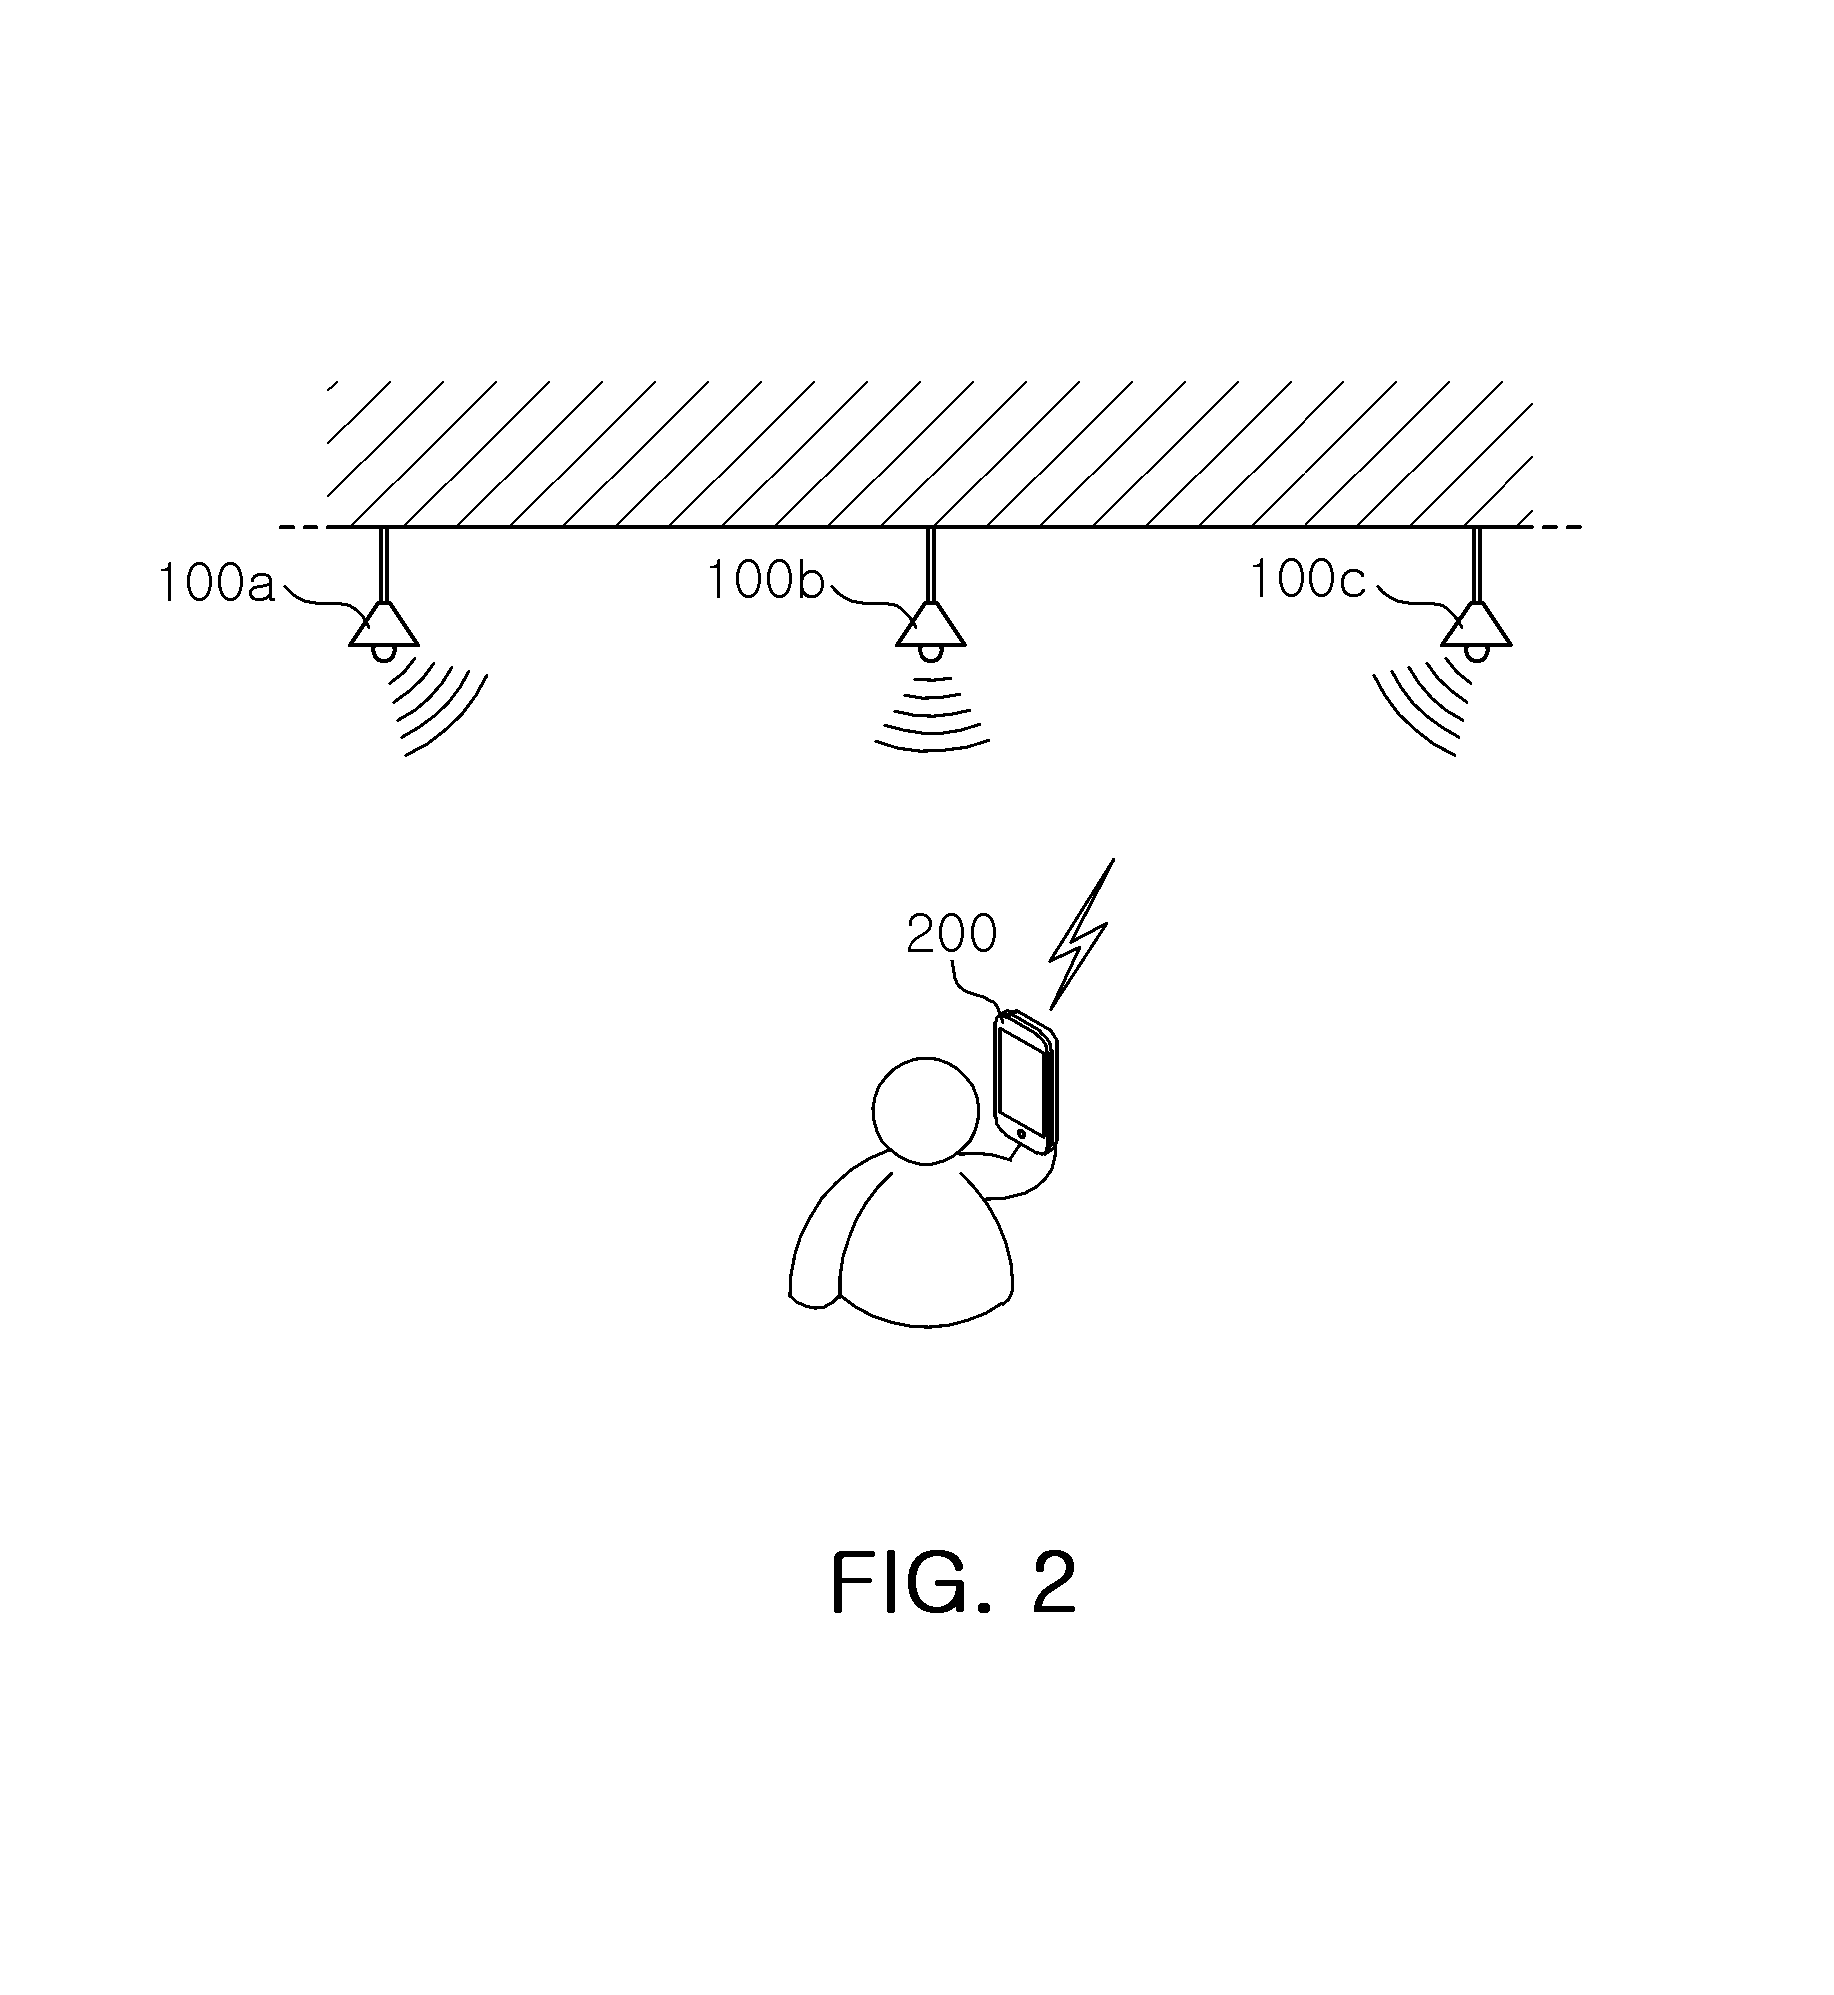 Lighting control system and method for controlling the same